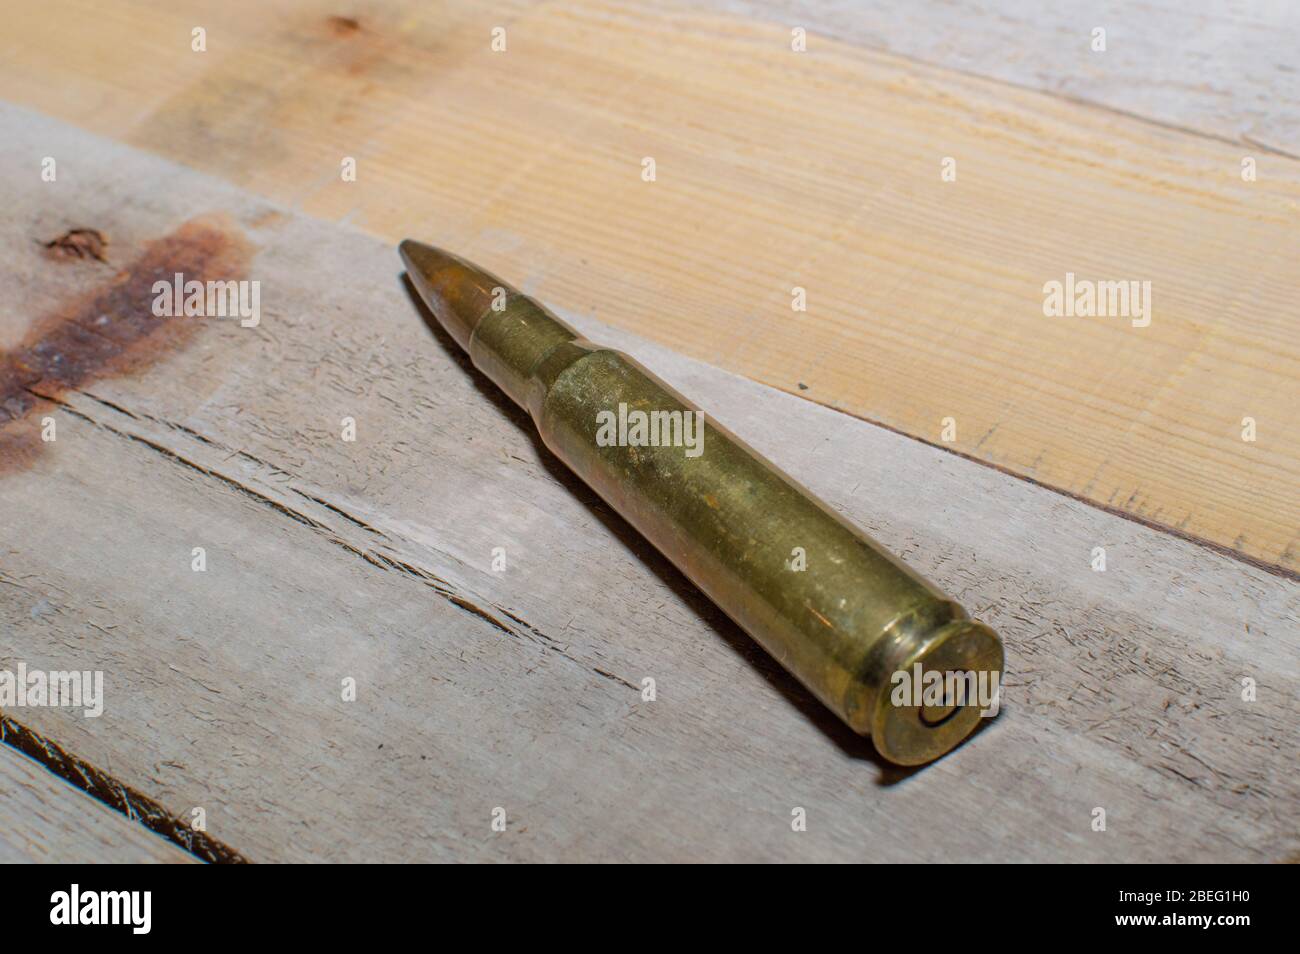 A 50 caliber rifle bullet laying on old barn wood. Stock Photo